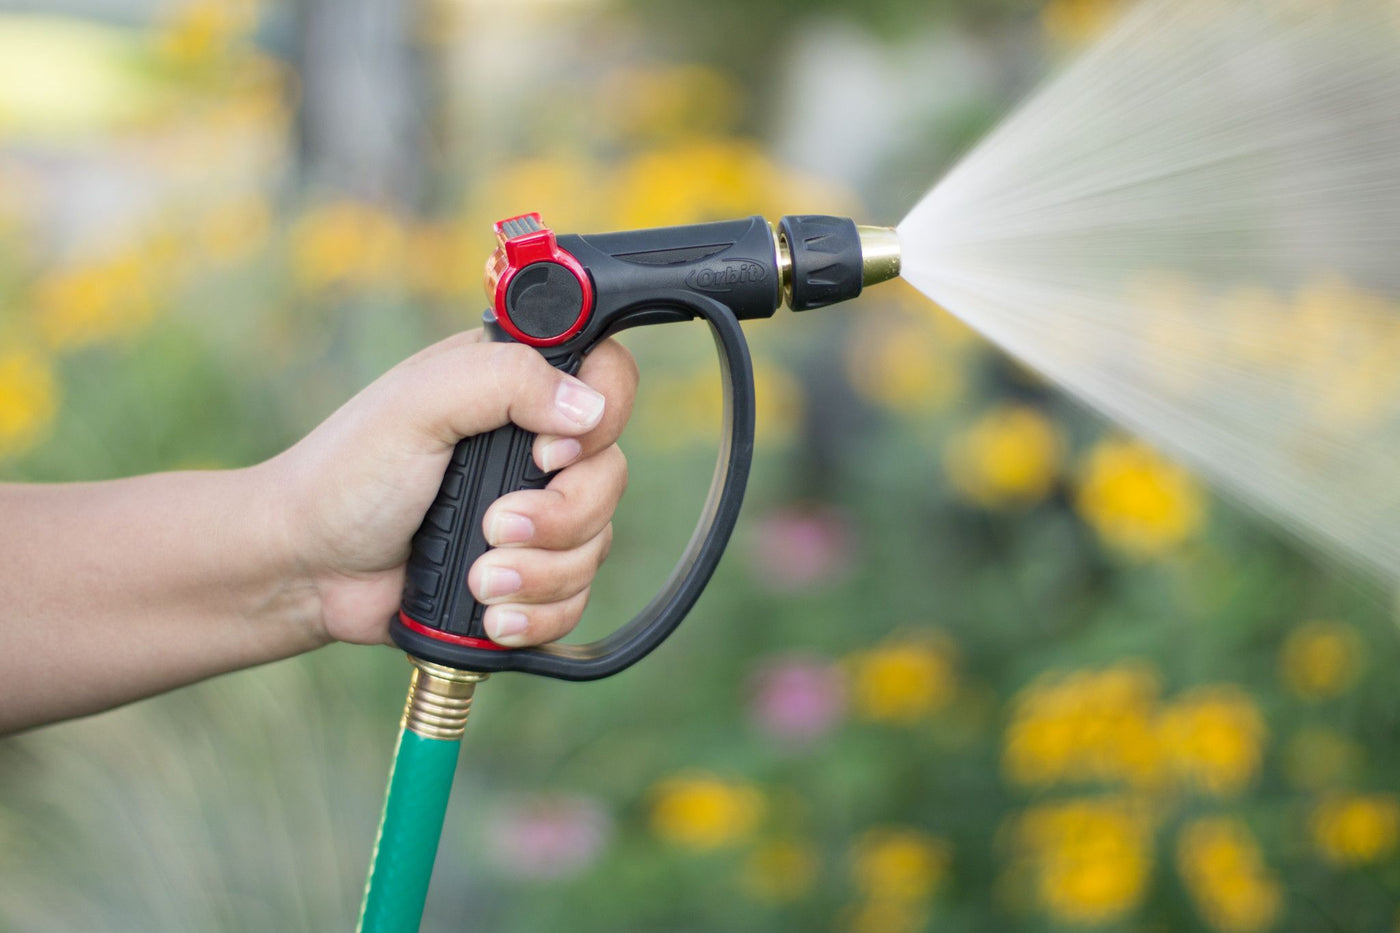 Black and red pro-flo adjustable spray thumb control d-grip brass tip watering nozzle, emitting a wide cone spray of water. 